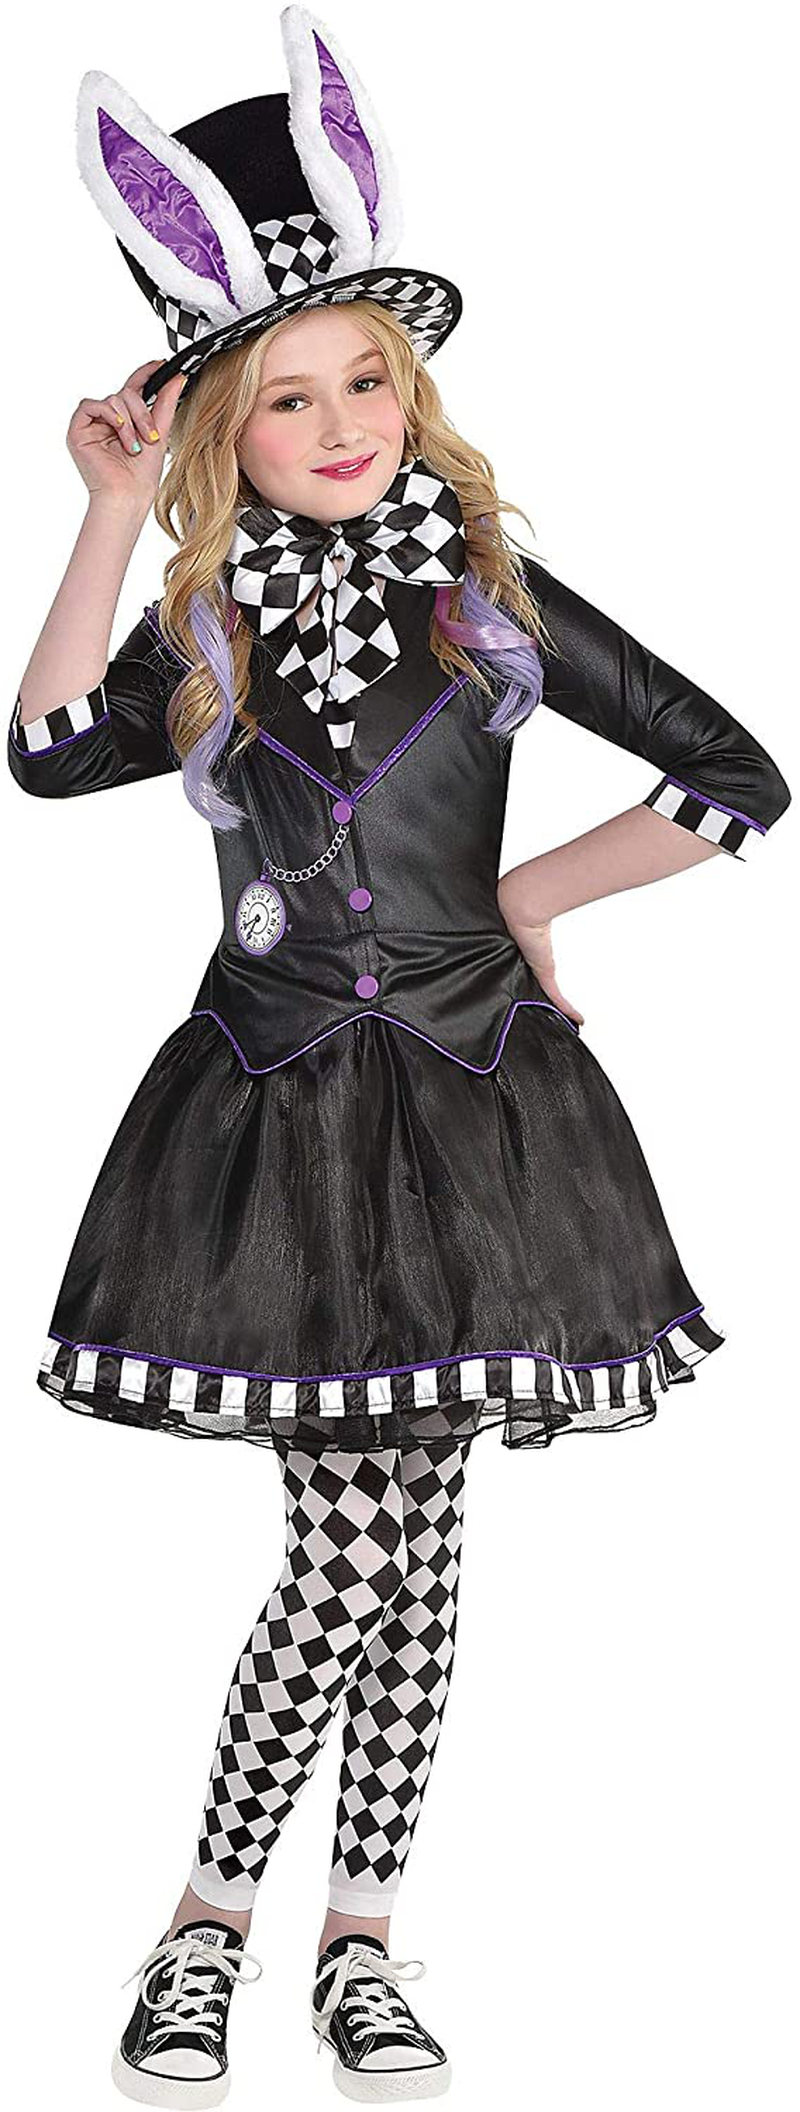 Party City Dark Mad Hatter Costume for Children, Includes a Dress with Jacket, Tights, a Bow Tie, and a Hat Apparel & Accessories > Costumes & Accessories > Costumes Party City Large  